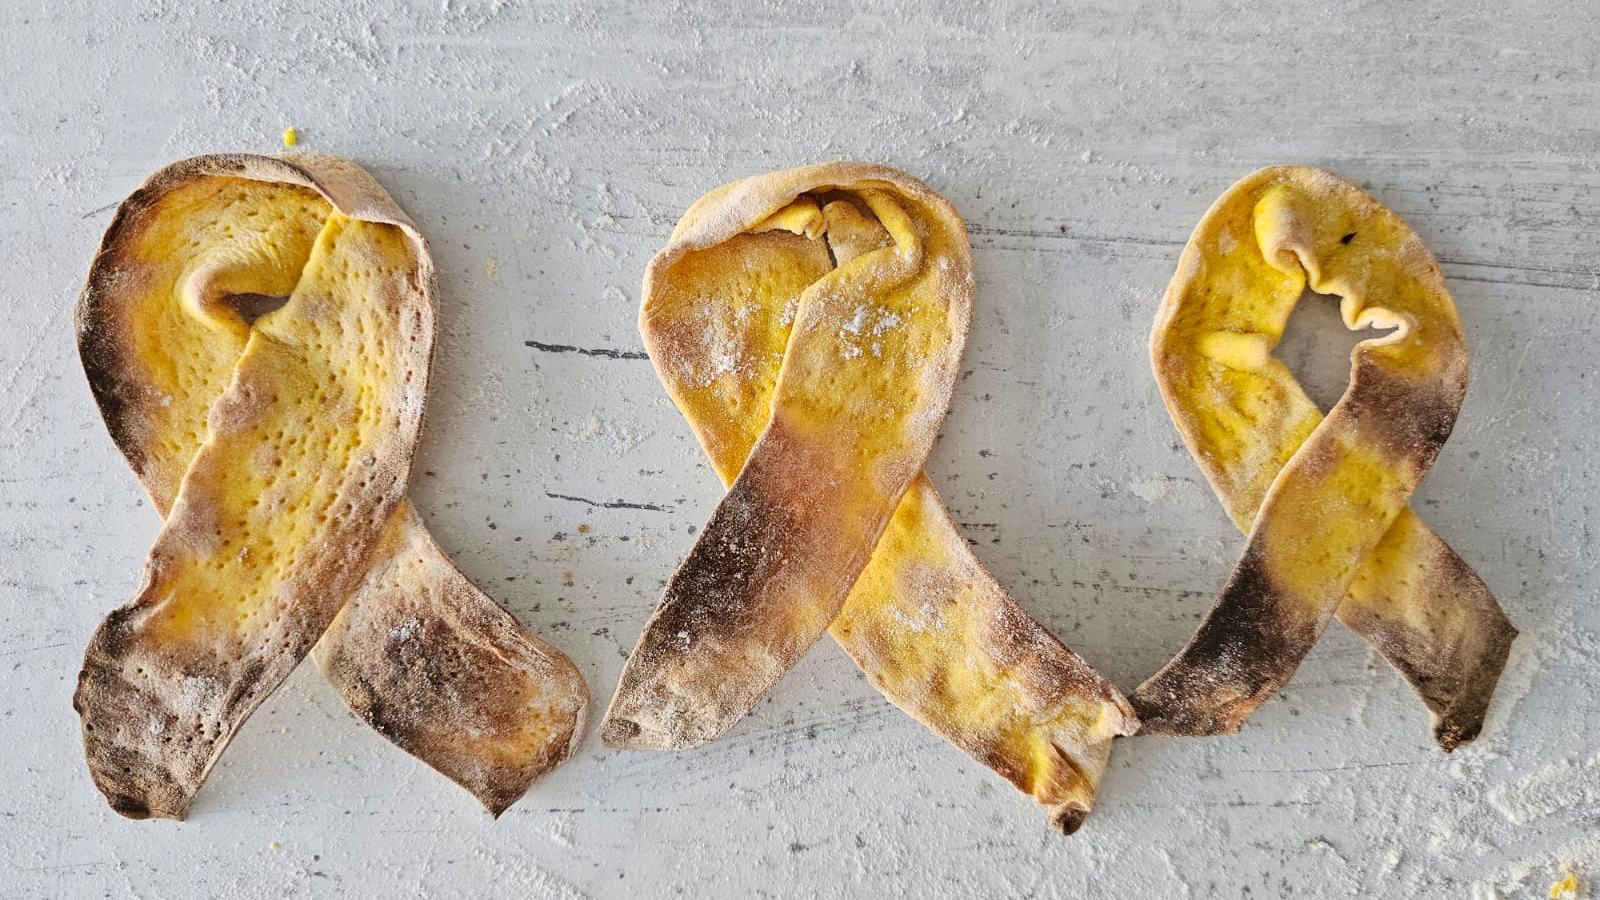 Idan Chabasov uses turmeric to make matzah resembling the yellow ribbons showing solidarity with the hostages in Gaza. Photo courtesy of Challah Prince